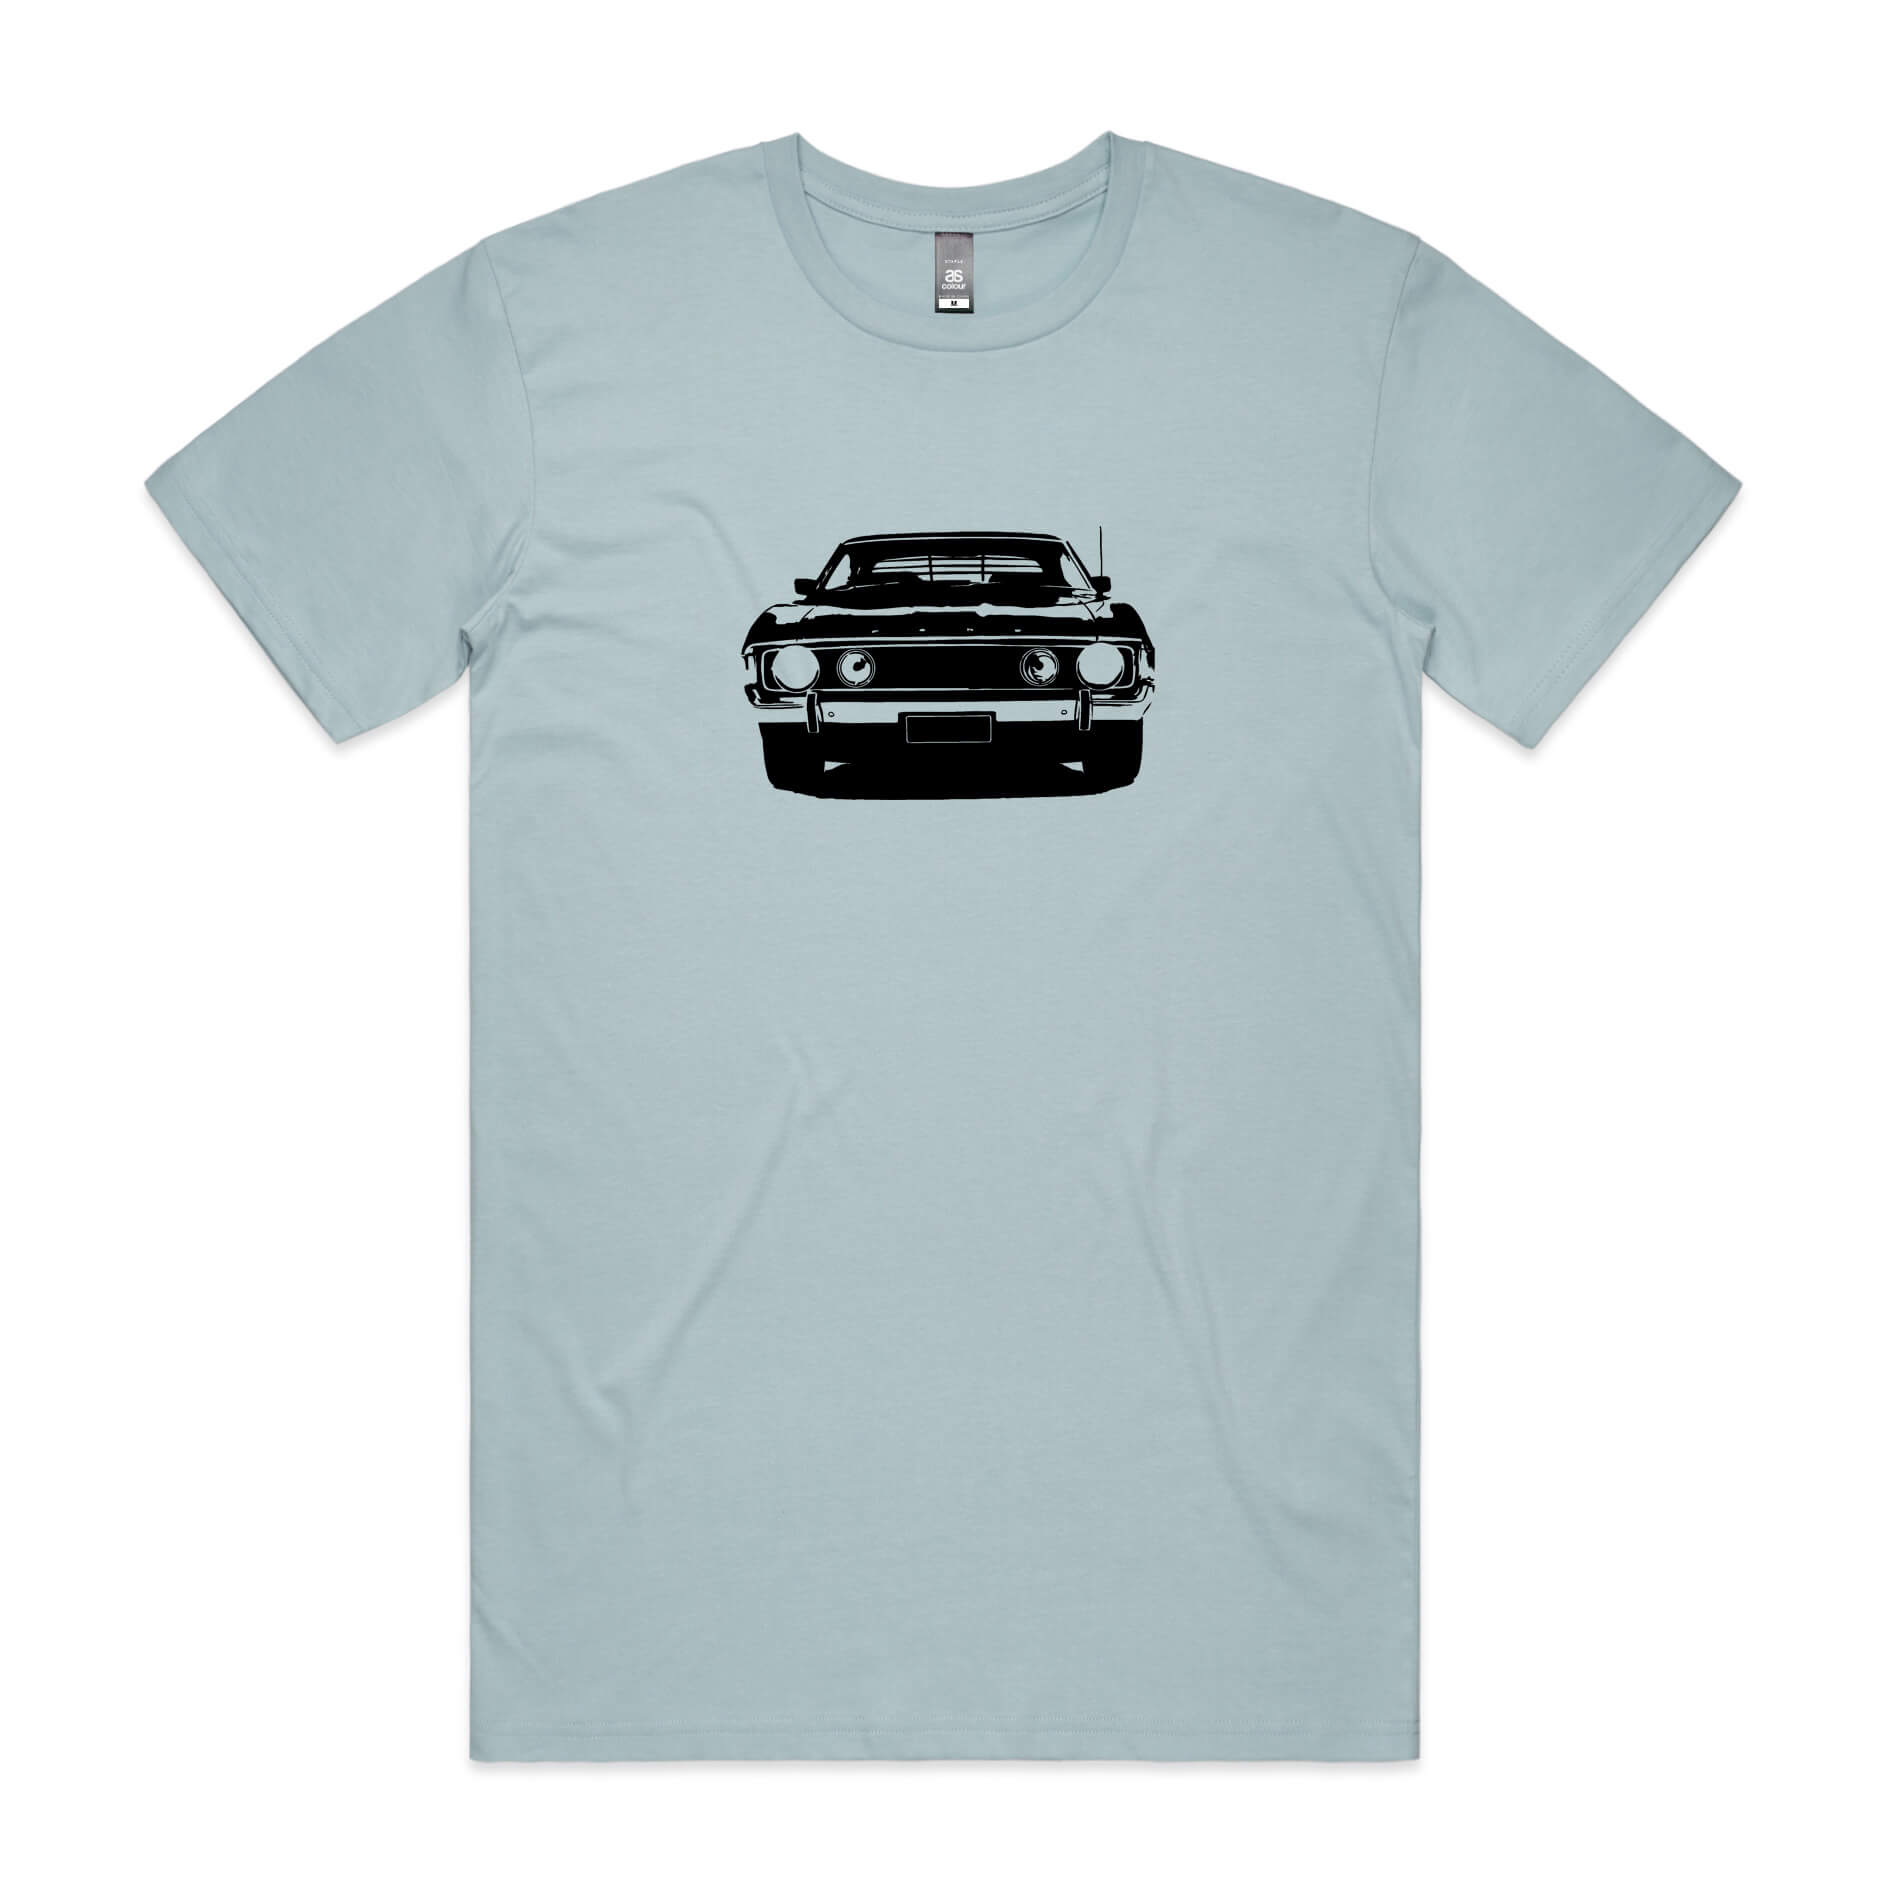 Ford XA Falcon t-shirt in light blue with a black car silhouette graphic